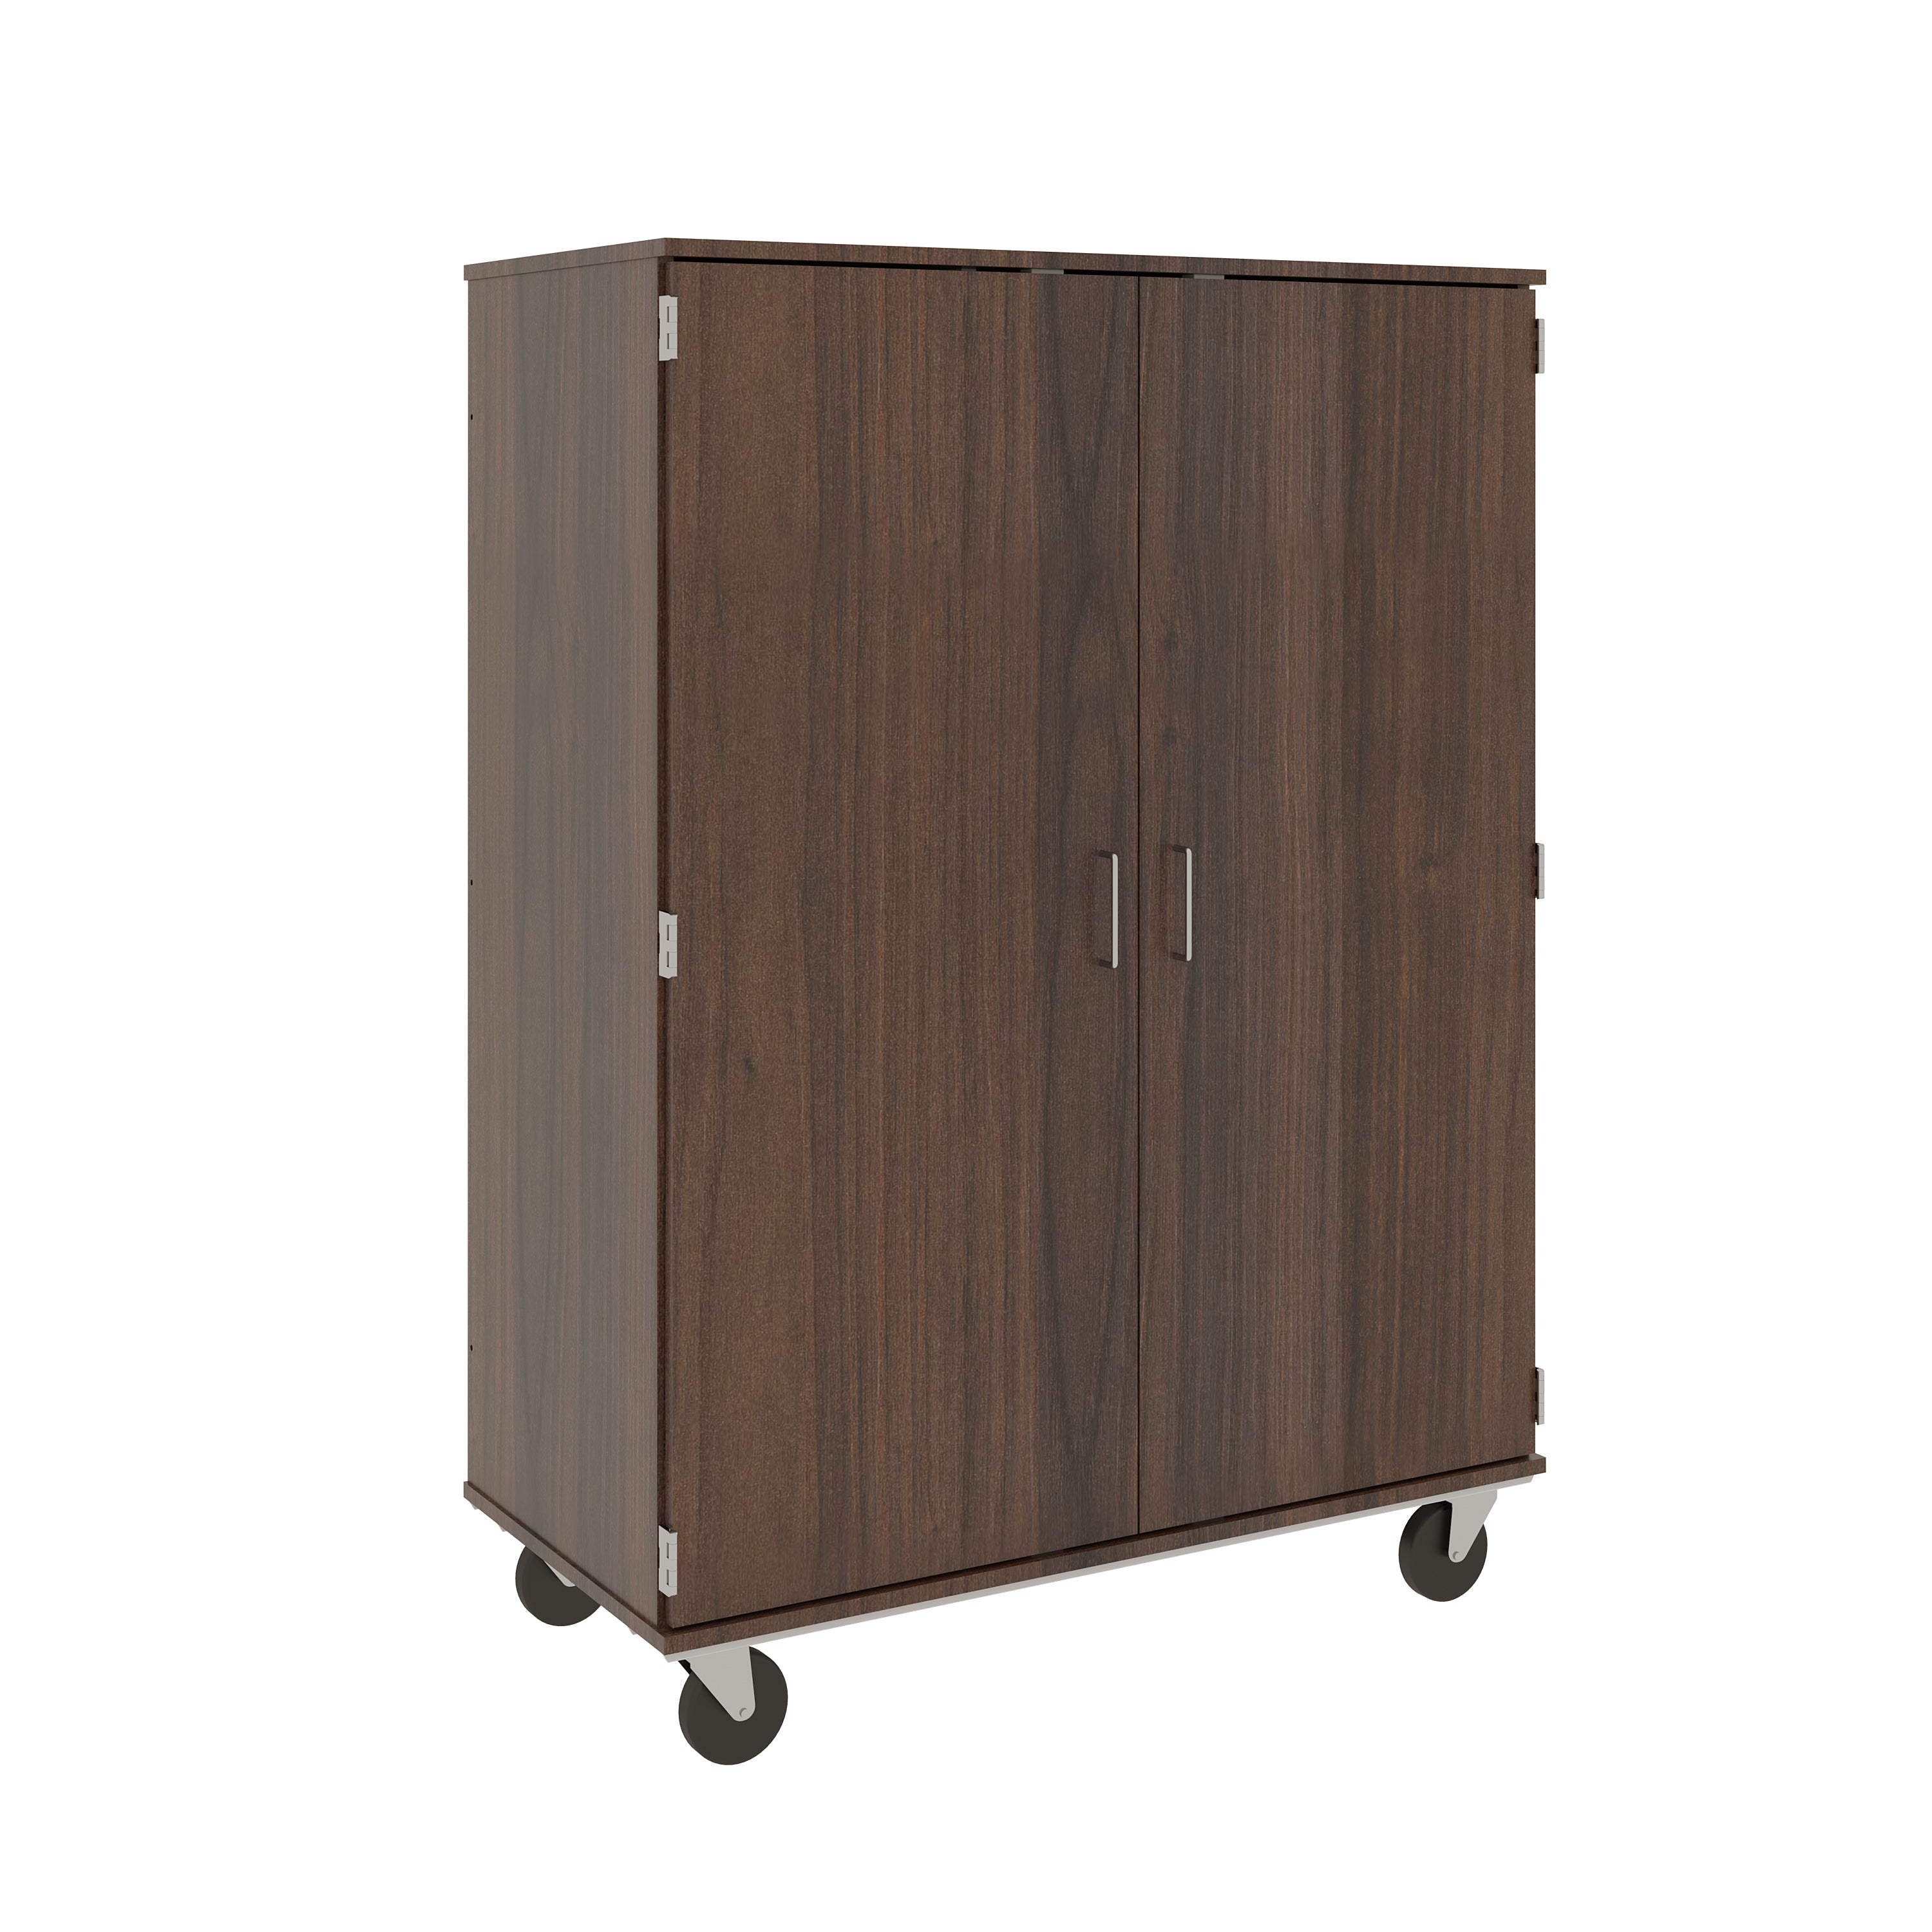 67" Tall Assembled Mobile Computer Storage Cabinet with Lockable Doors - 80610 F67